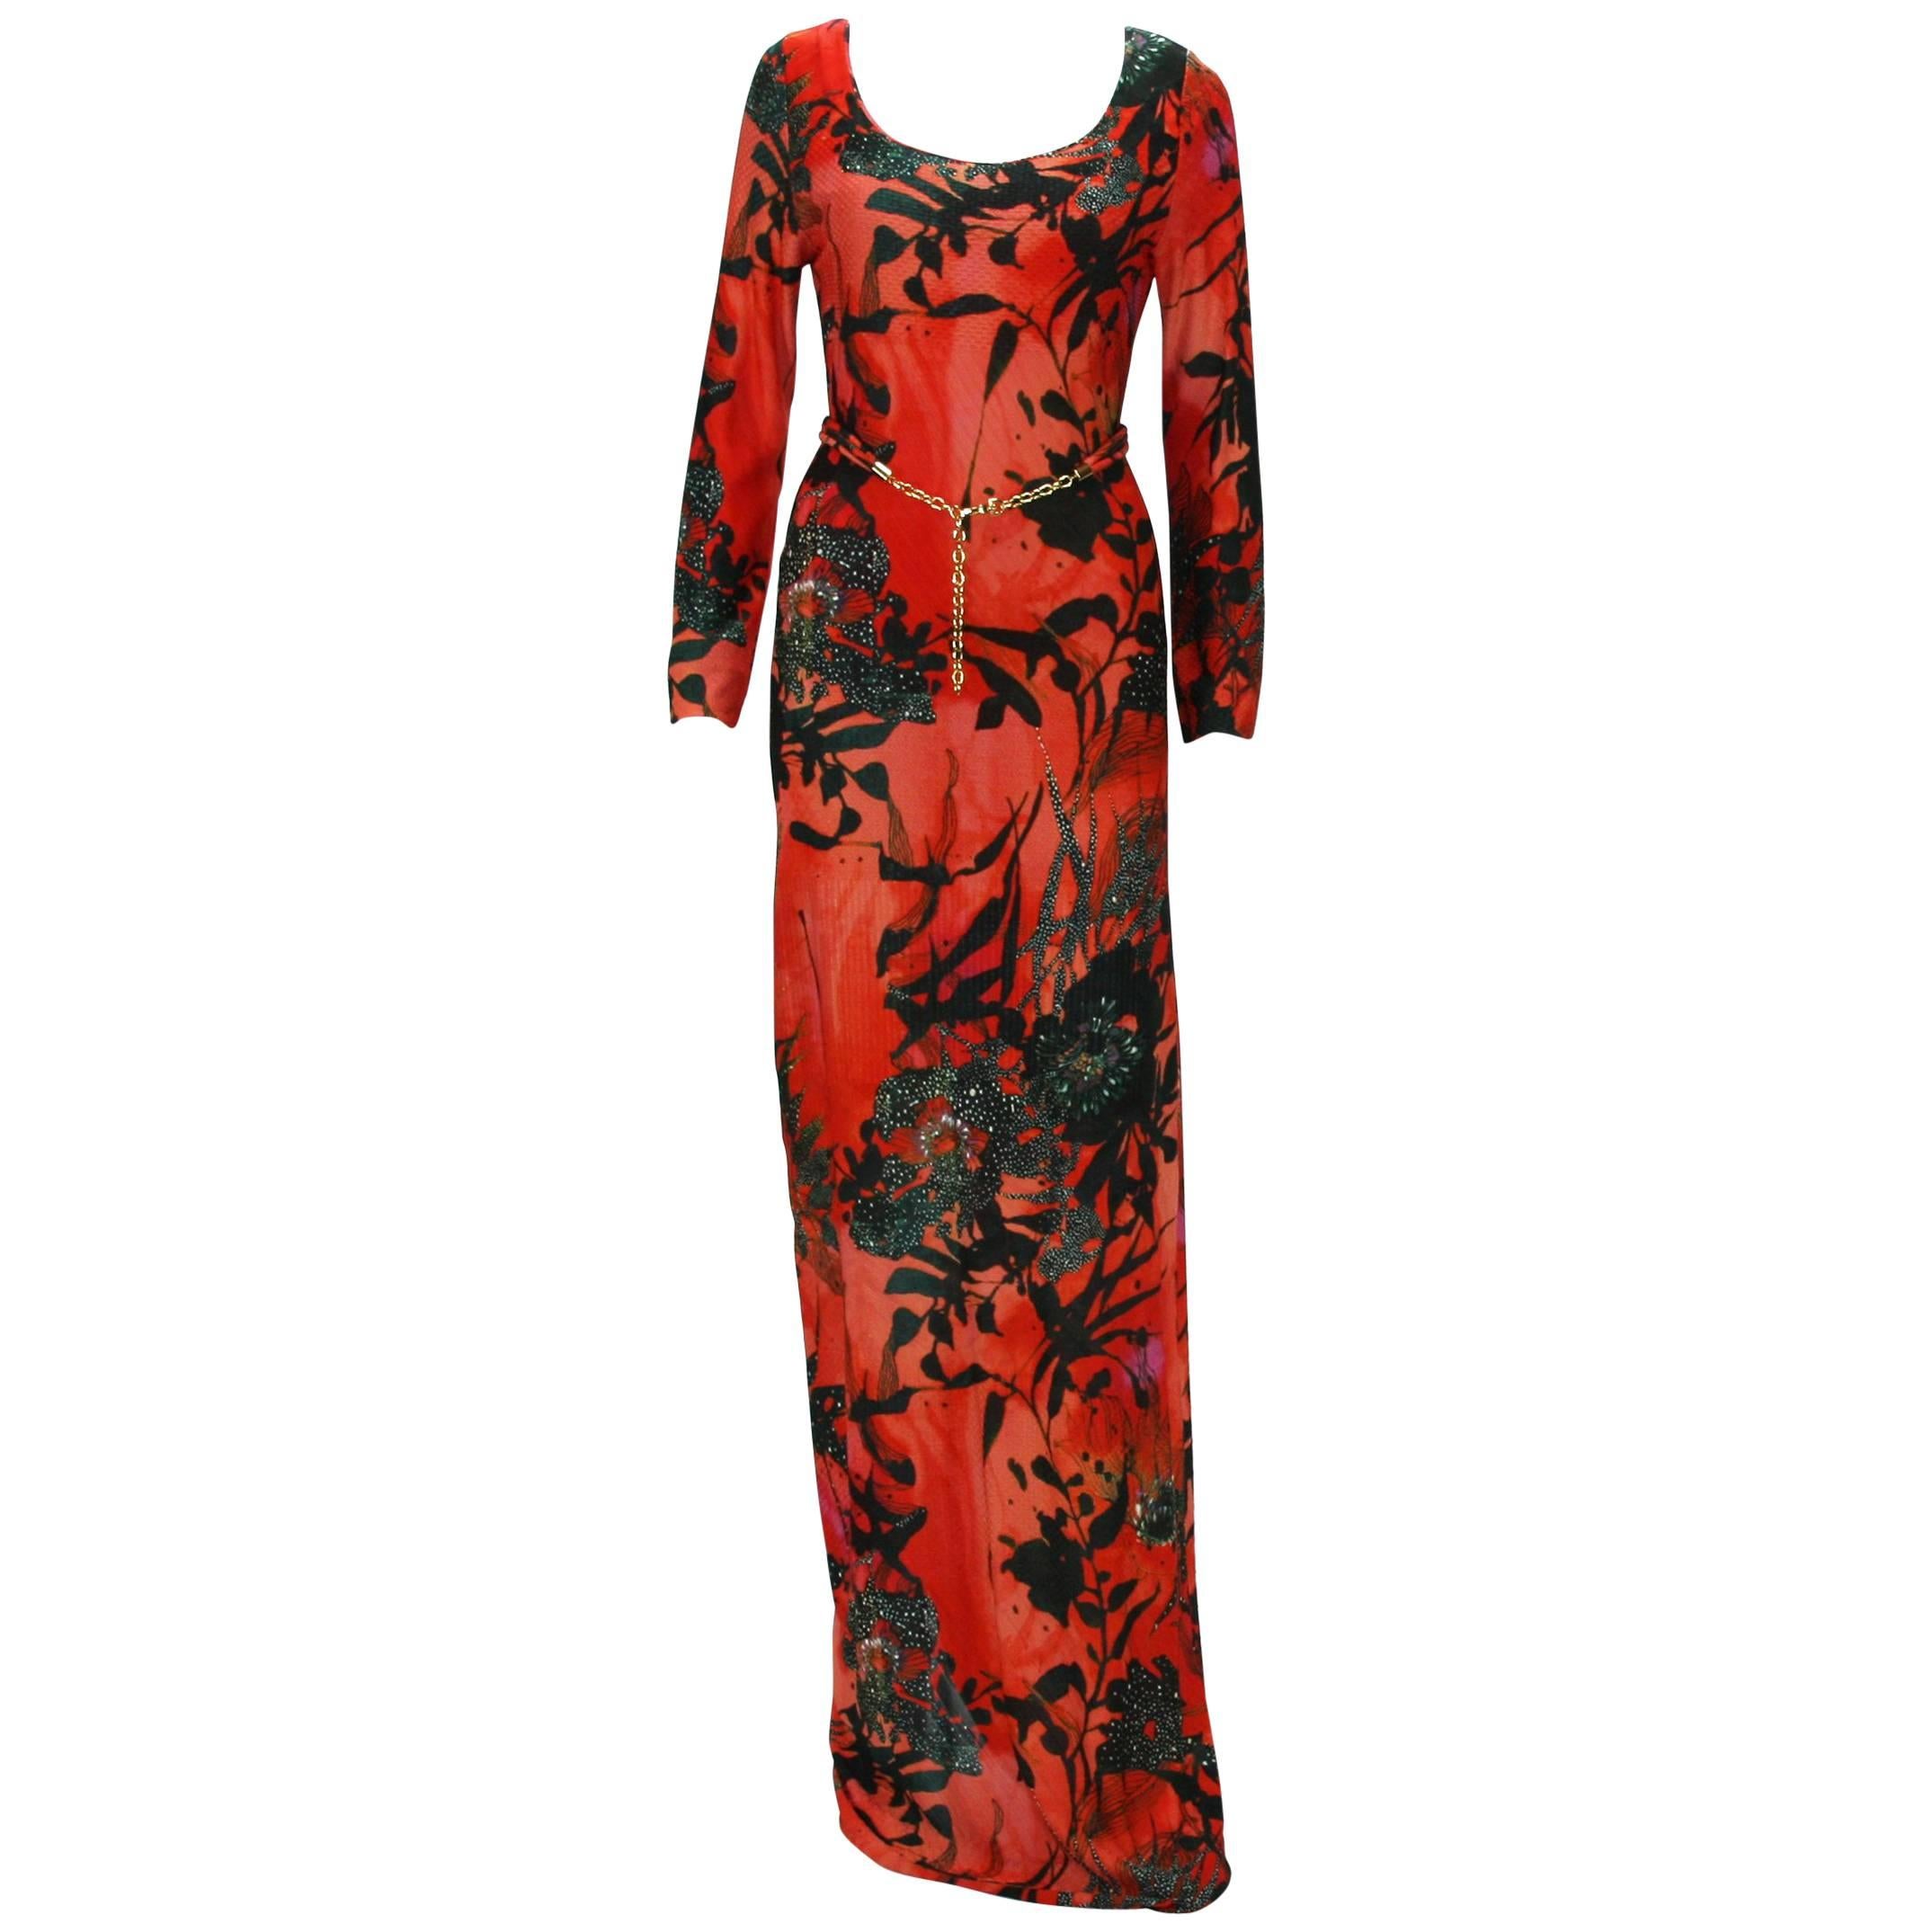 New ETRO Jersey Red Black Floral Print Long Dress with Belt IT.42 - US 6